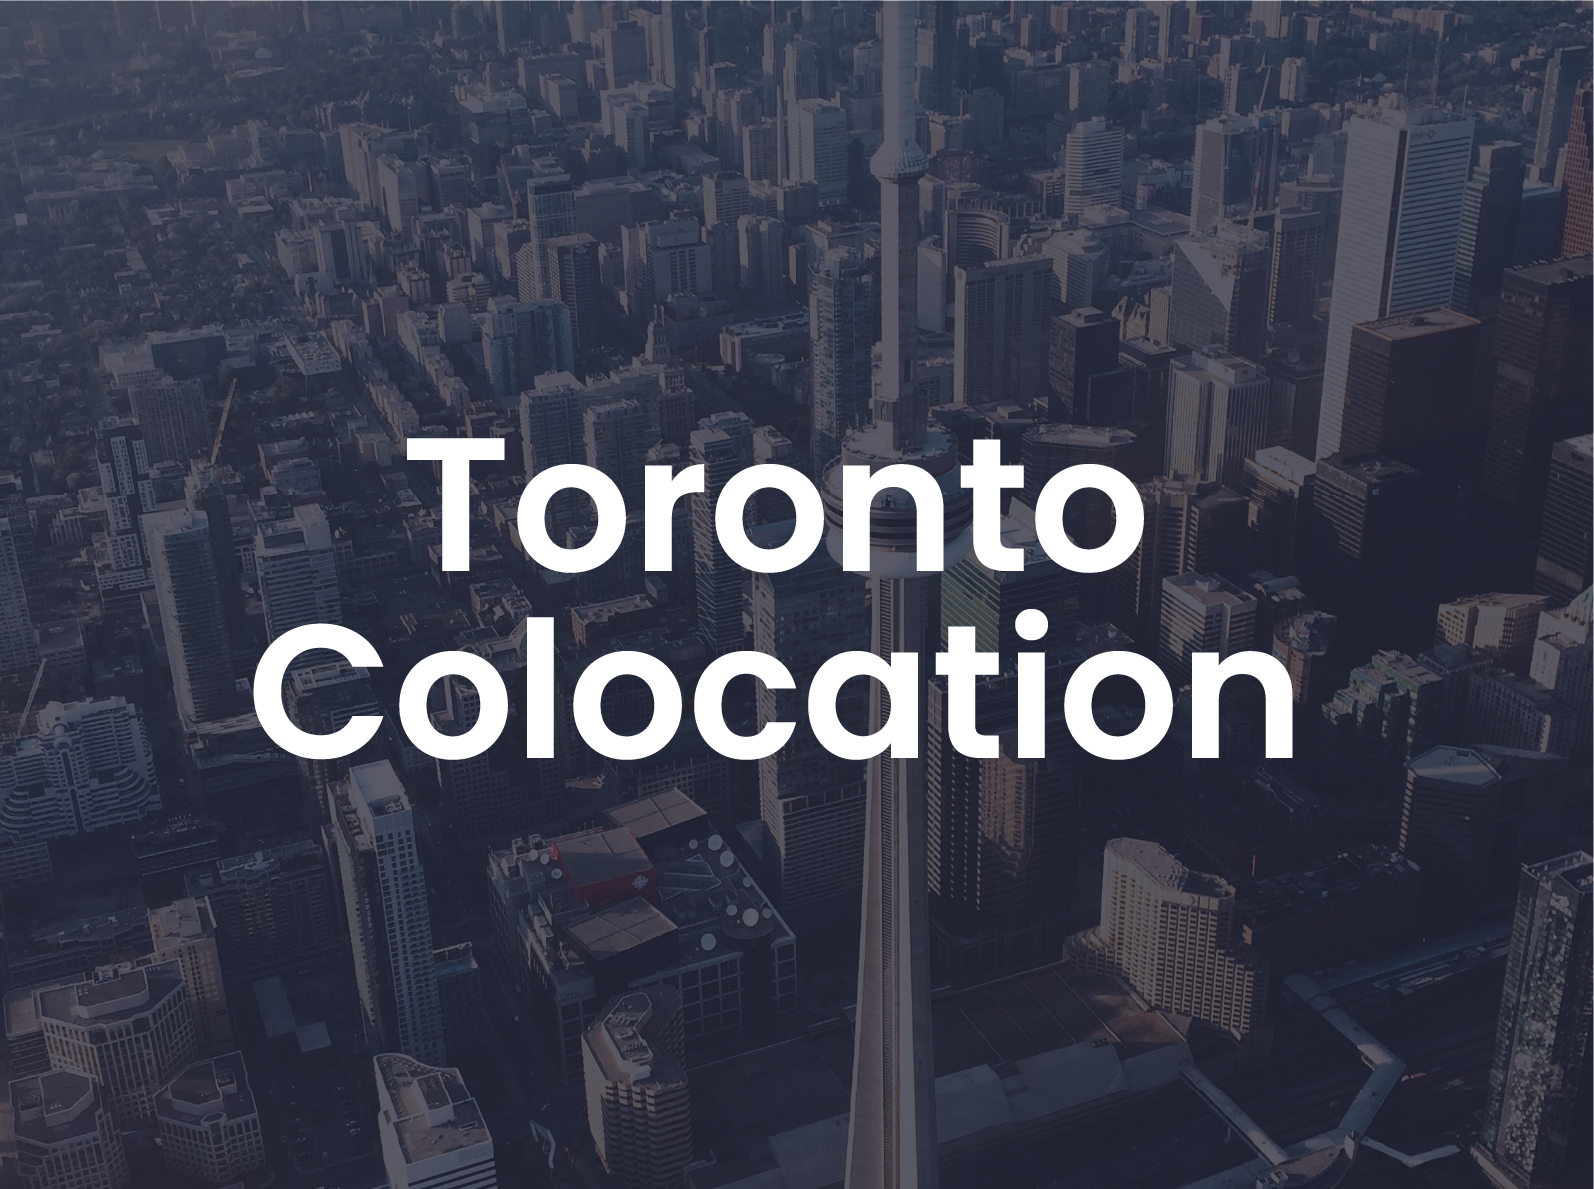 An image of a Toronto skyline with the text "Toronto Colocation" across it